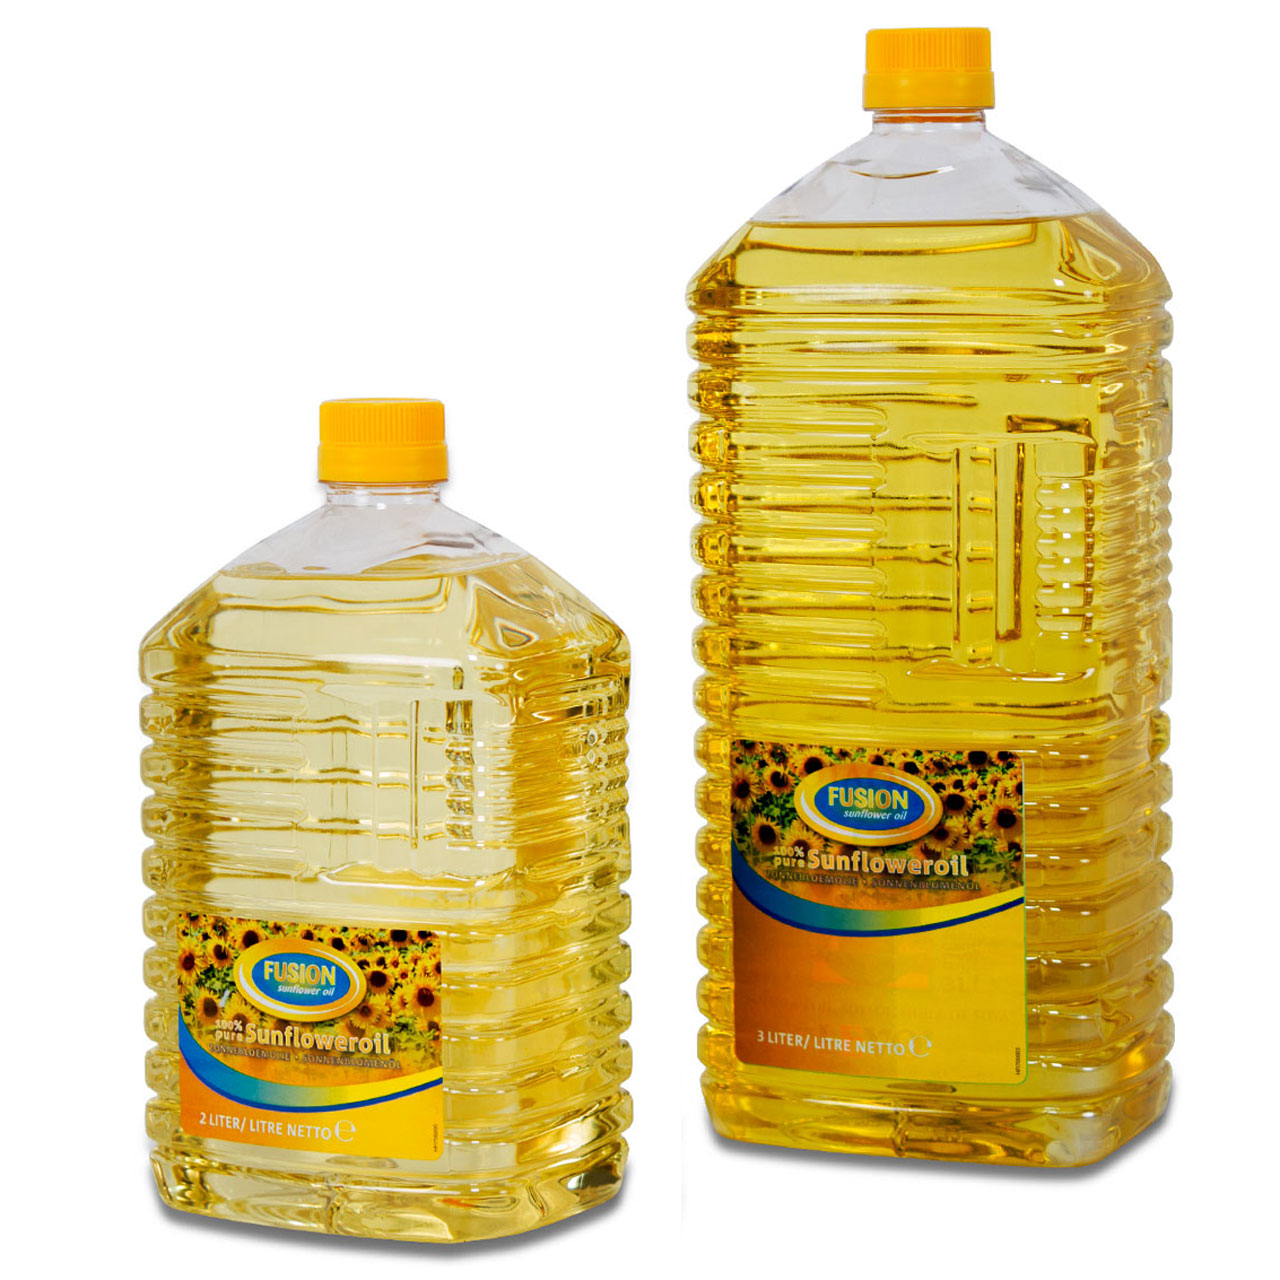 HFI Filling - The Personal Touch in edible oil